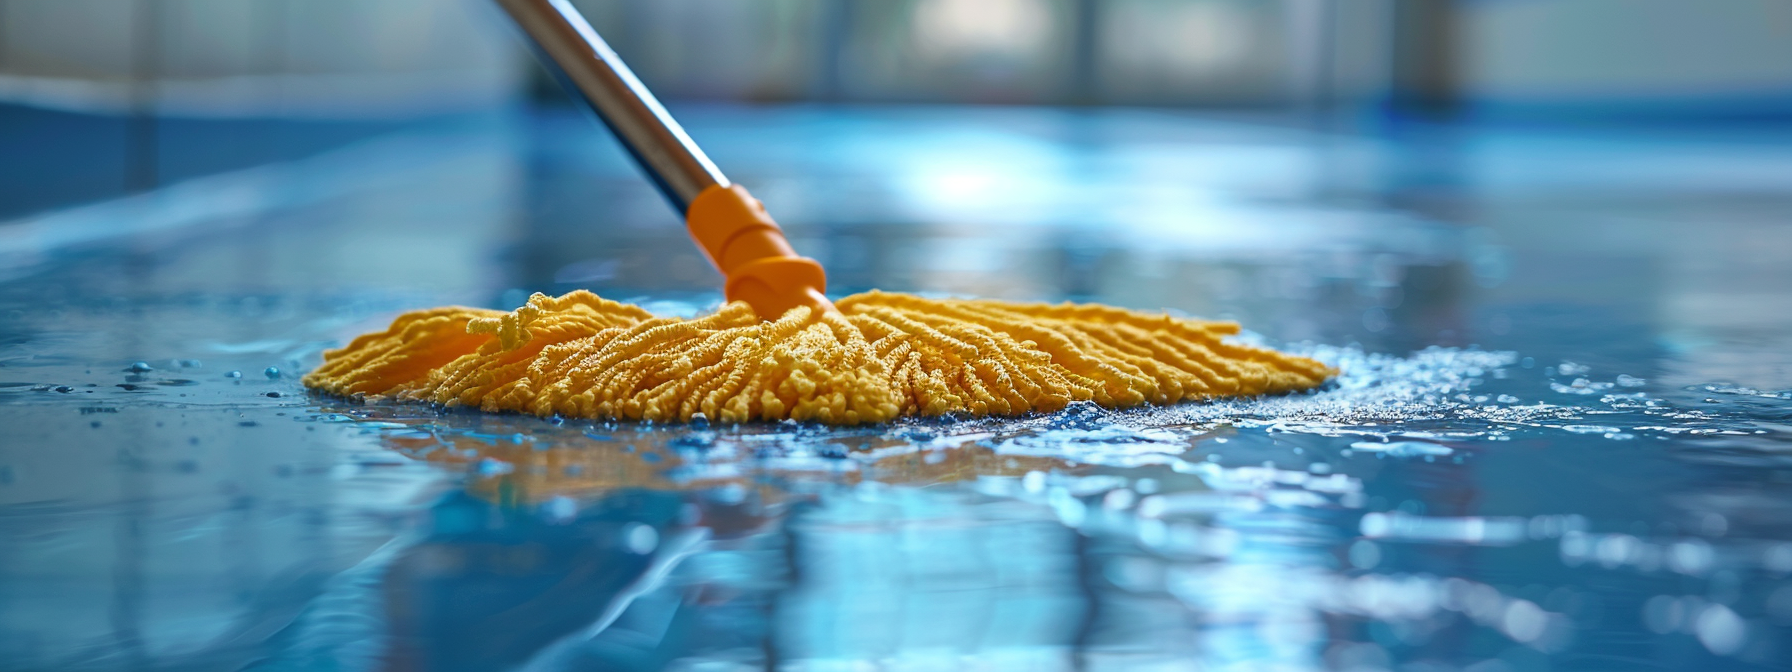 Mop Maintenance for Effective Floor Cleaning